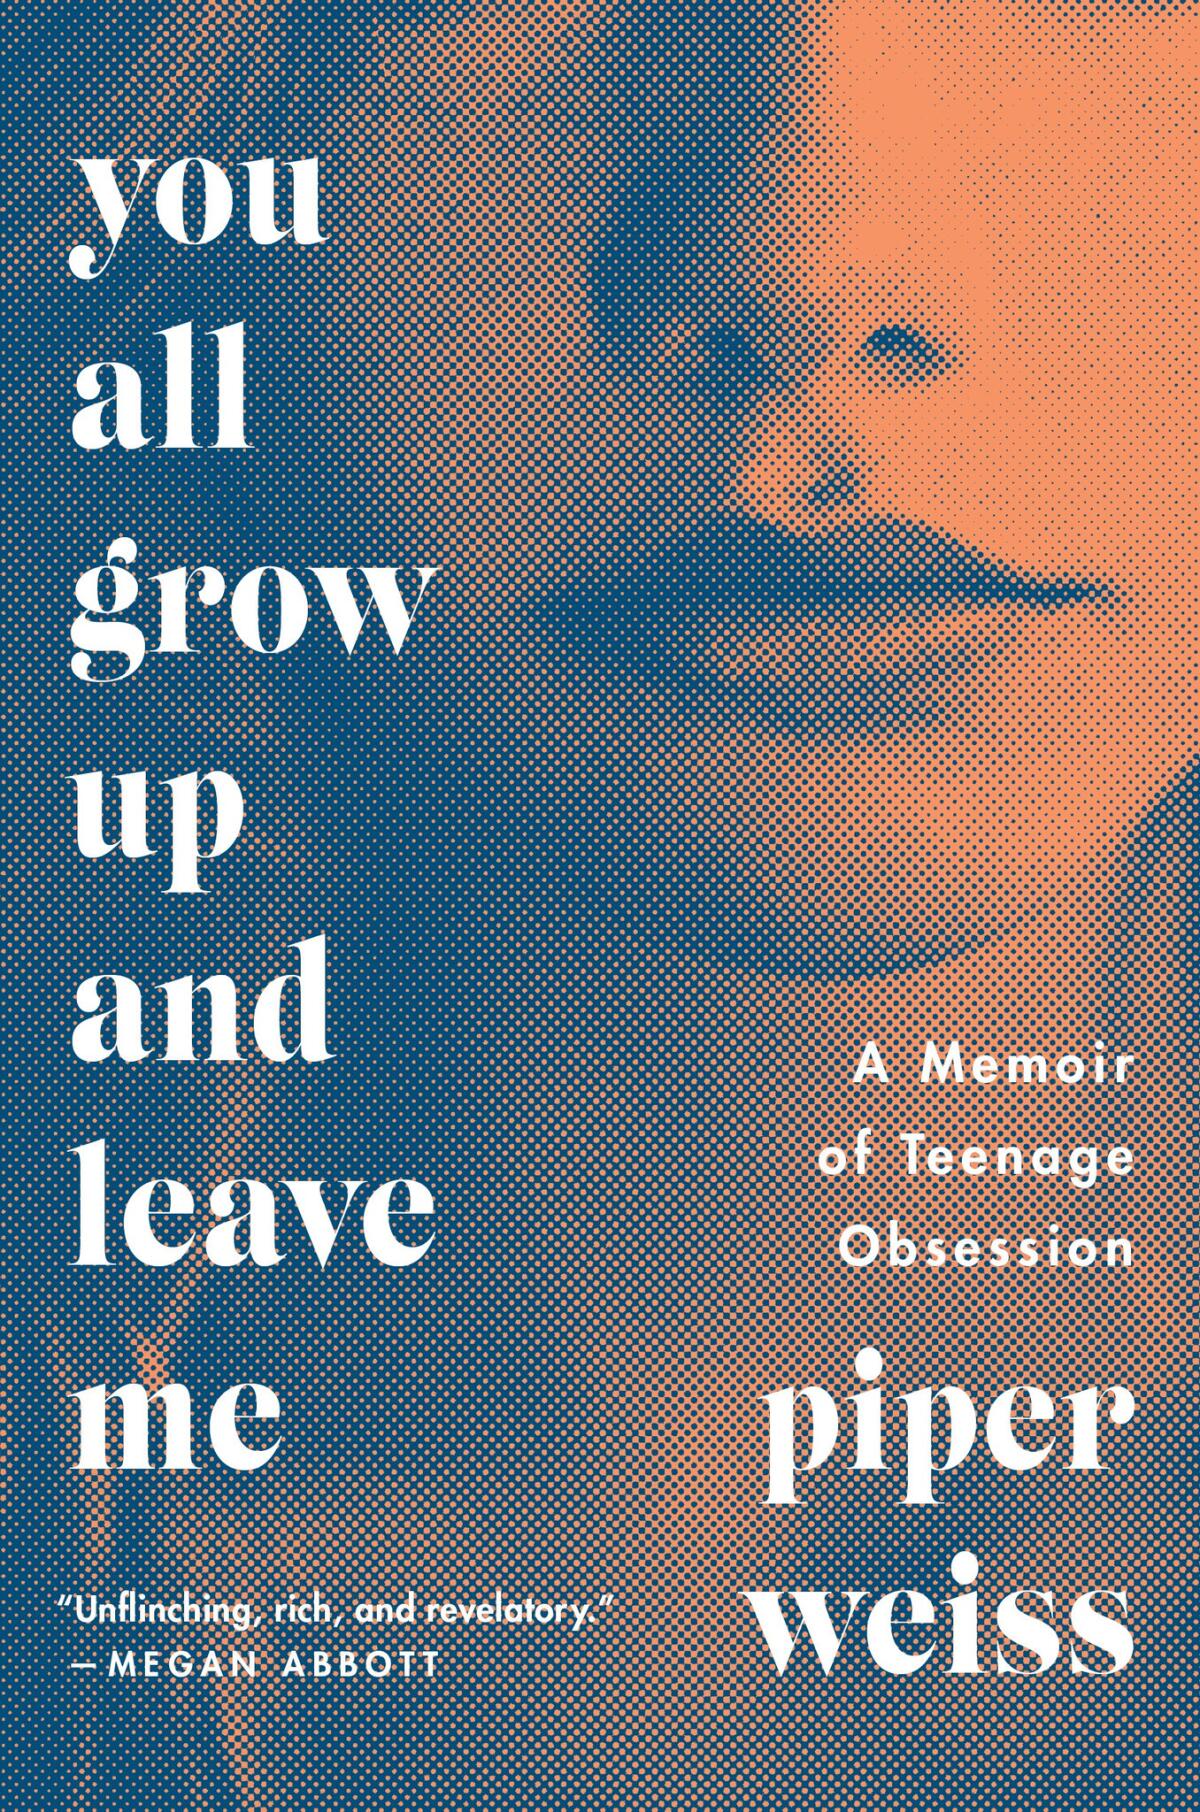 "You All Grow Up and Leave Me" by Piper Weiss